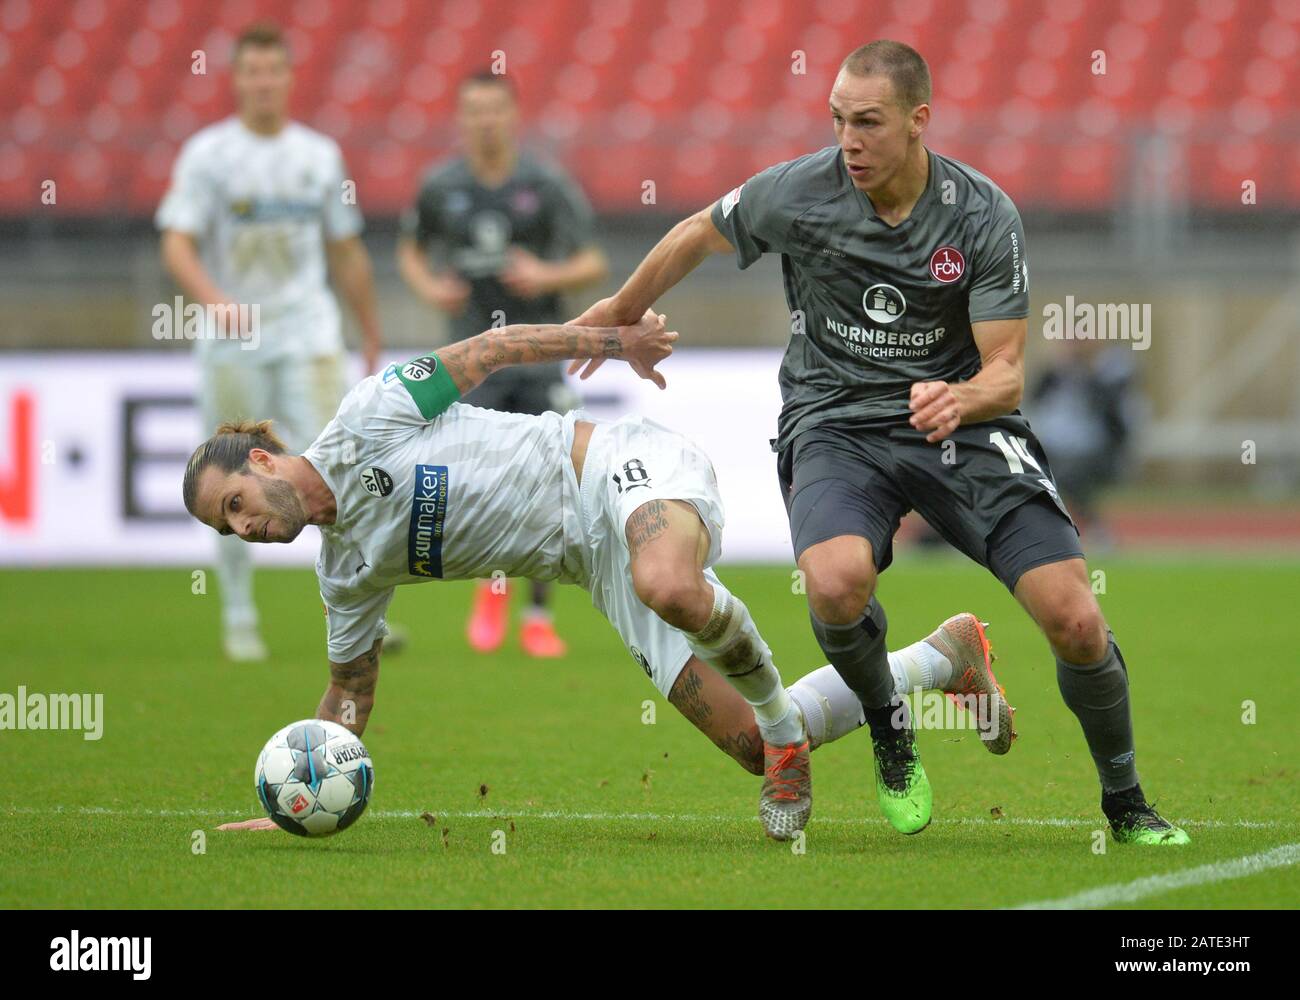 Nuremberg, Germany. 02nd Feb, 2020. Football: 2nd Bundesliga, 1st FC Nürnberg - SV Sandhausen, 20th matchday at the Max Morlock Stadium. Michael Frey from Nuremberg plays against Dennis Diekmeier (l) from Sandhausen. Credit: Timm Schamberger/dpa - IMPORTANT NOTE: In accordance with the regulations of the DFL Deutsche Fußball Liga and the DFB Deutscher Fußball-Bund, it is prohibited to exploit or have exploited in the stadium and/or from the game taken photographs in the form of sequence images and/or video-like photo series./dpa/Alamy Live News Stock Photo